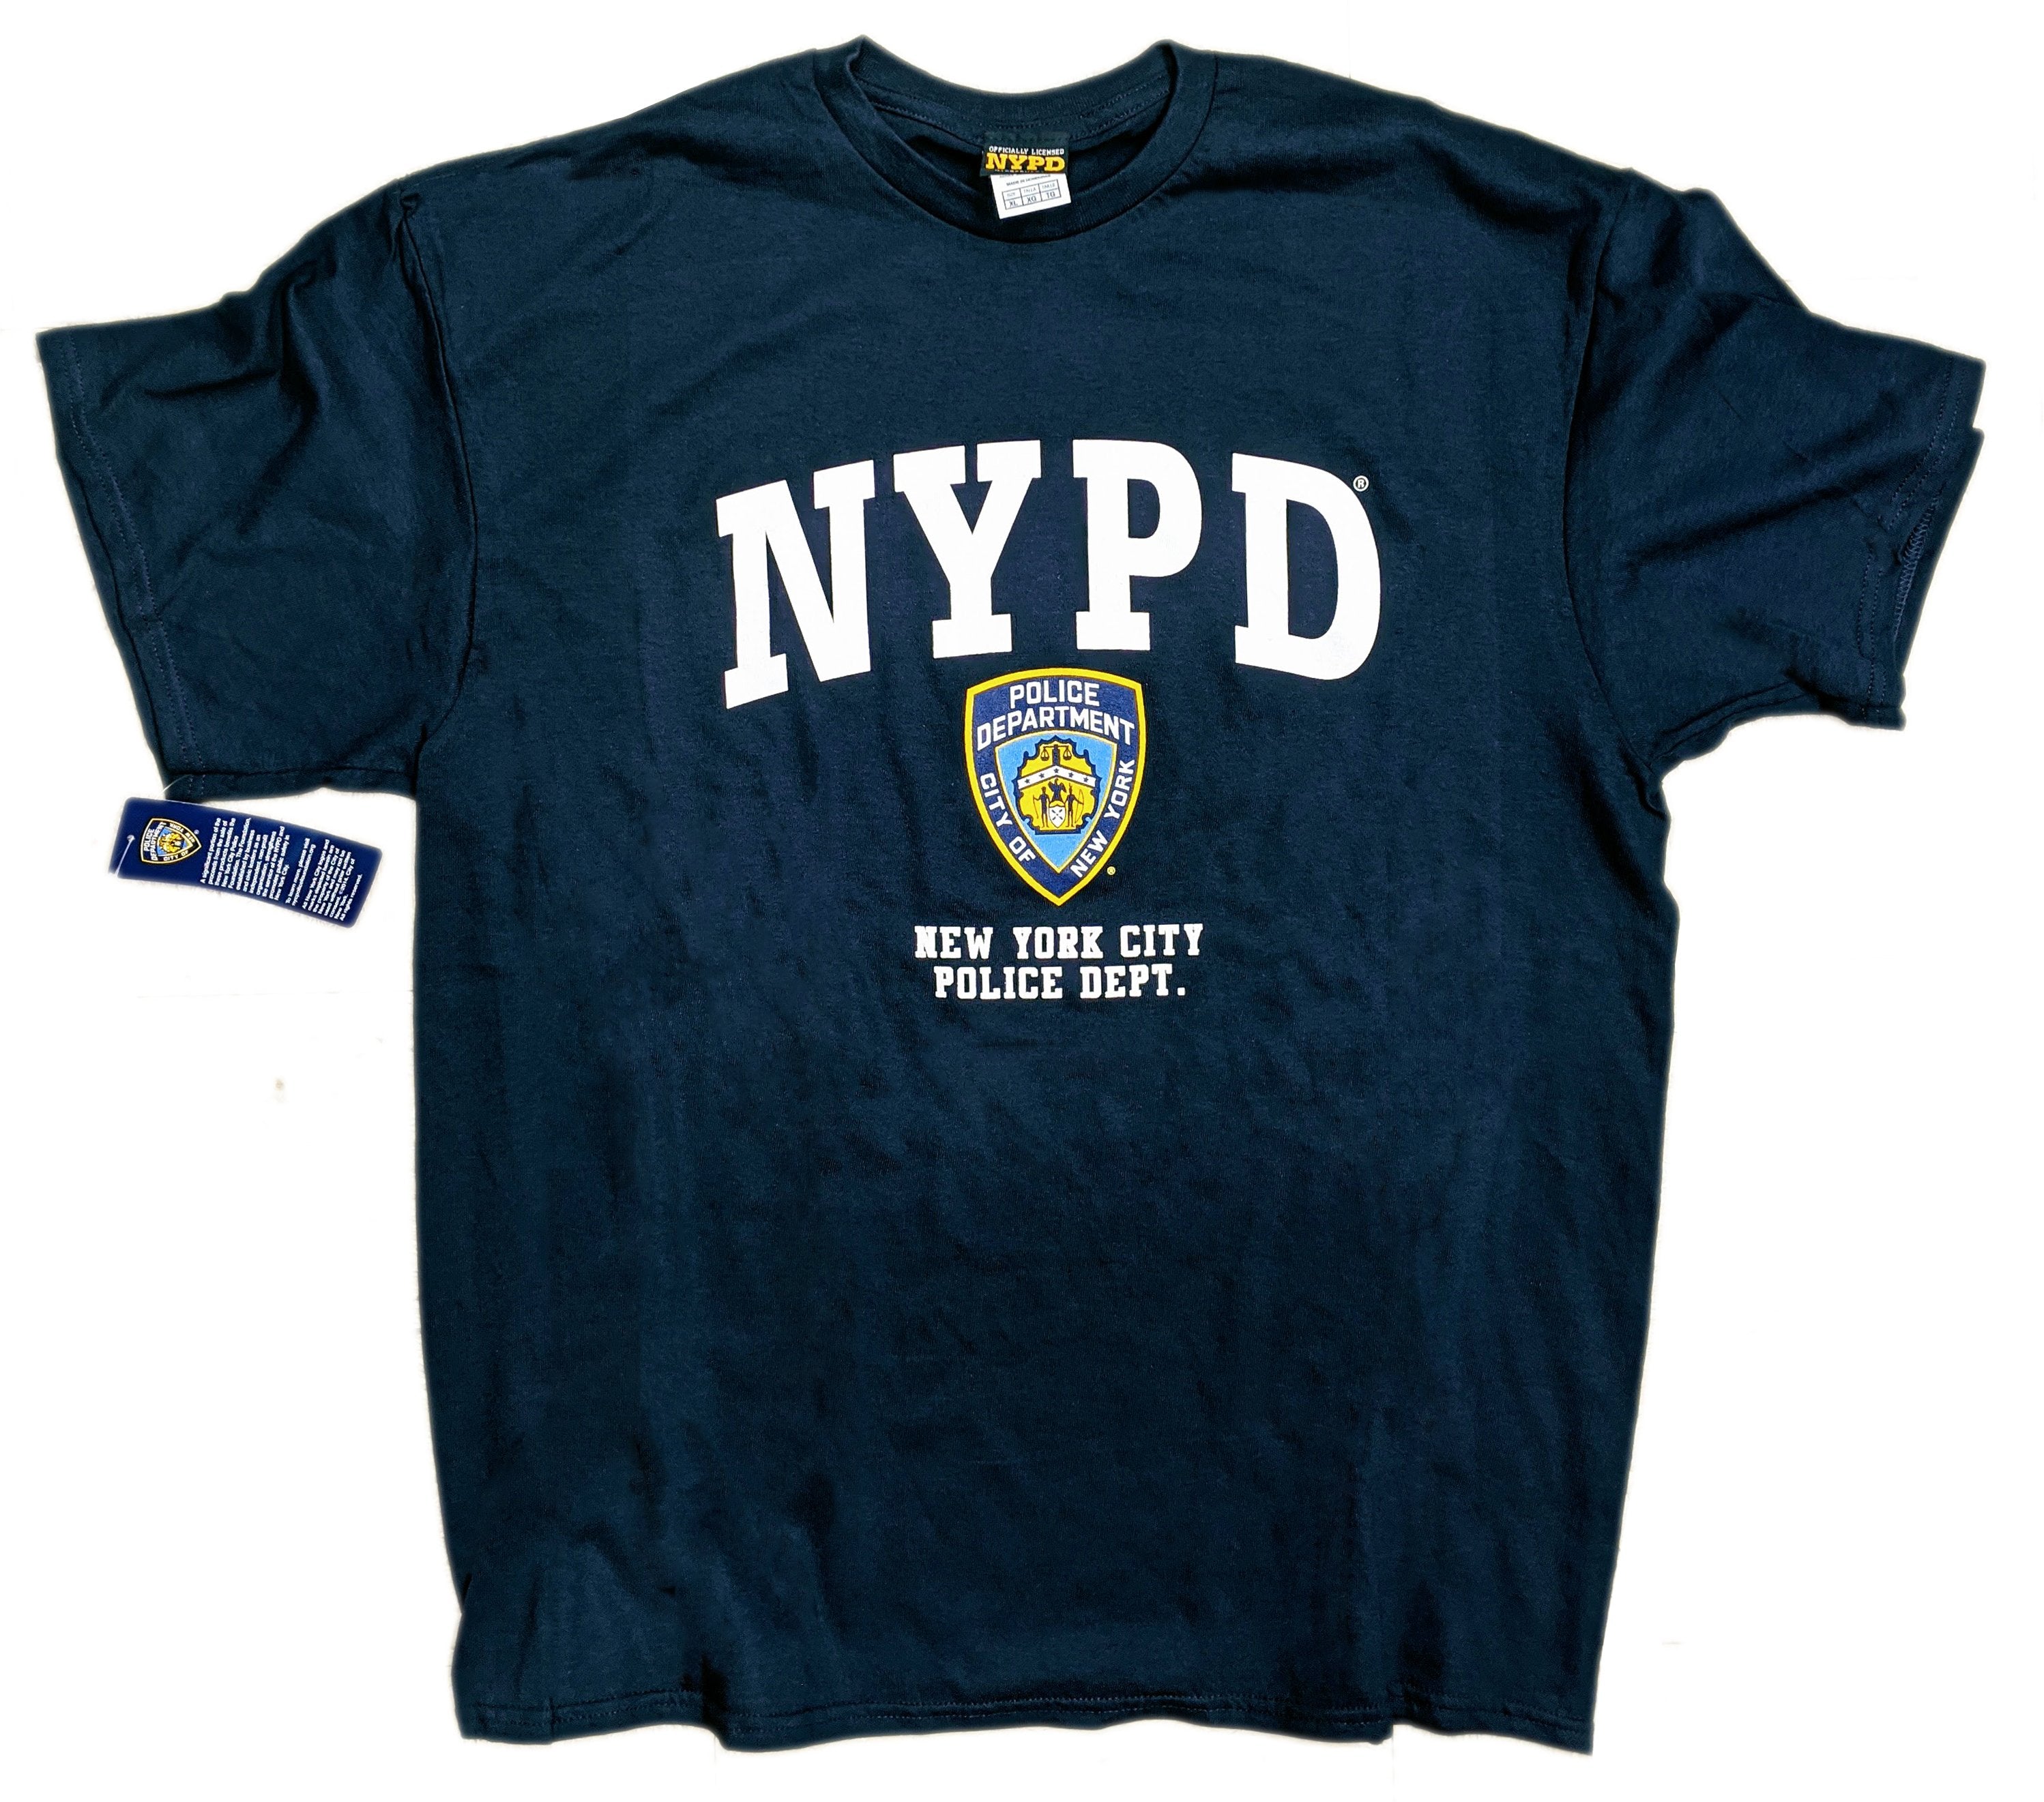 NYPD Short Sleeve with NYPD Logo and Shield Print T-Shirt Navy